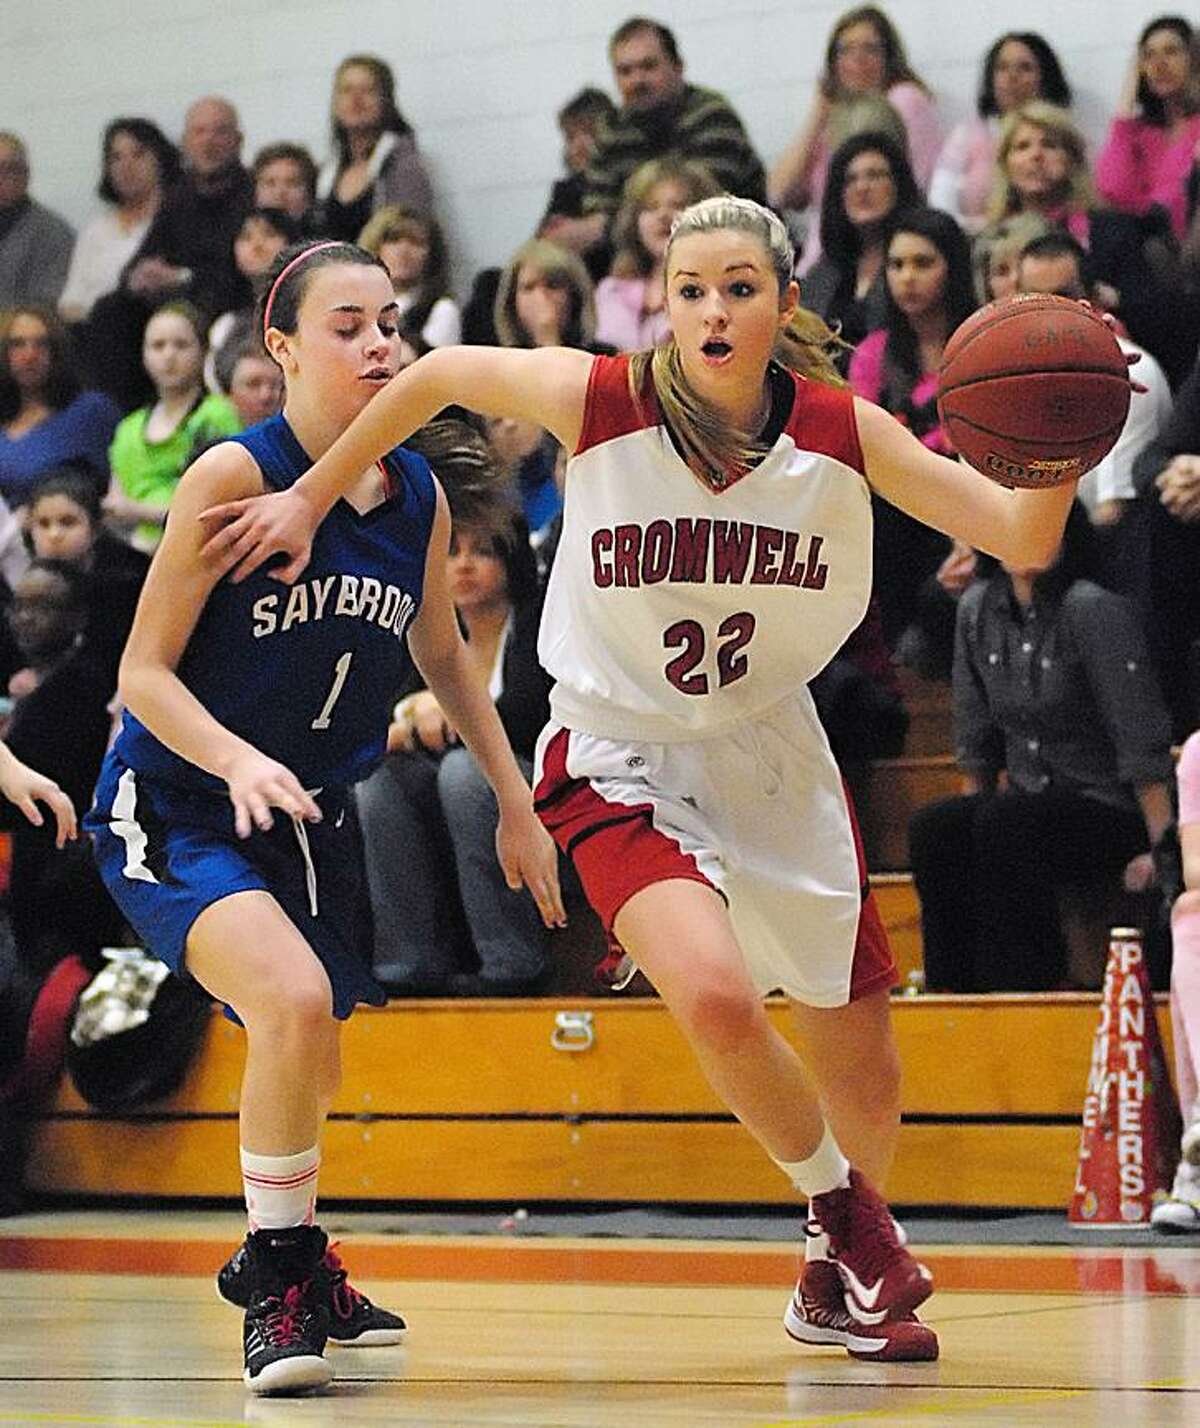 Catherine Avalone/The Middletown PressCromwell's Araya Lessard dribbles past Old Saybrook's Molly Beck during Friday nights game in Cromwell. Cromwell defeated Old Saybrook 51-40.